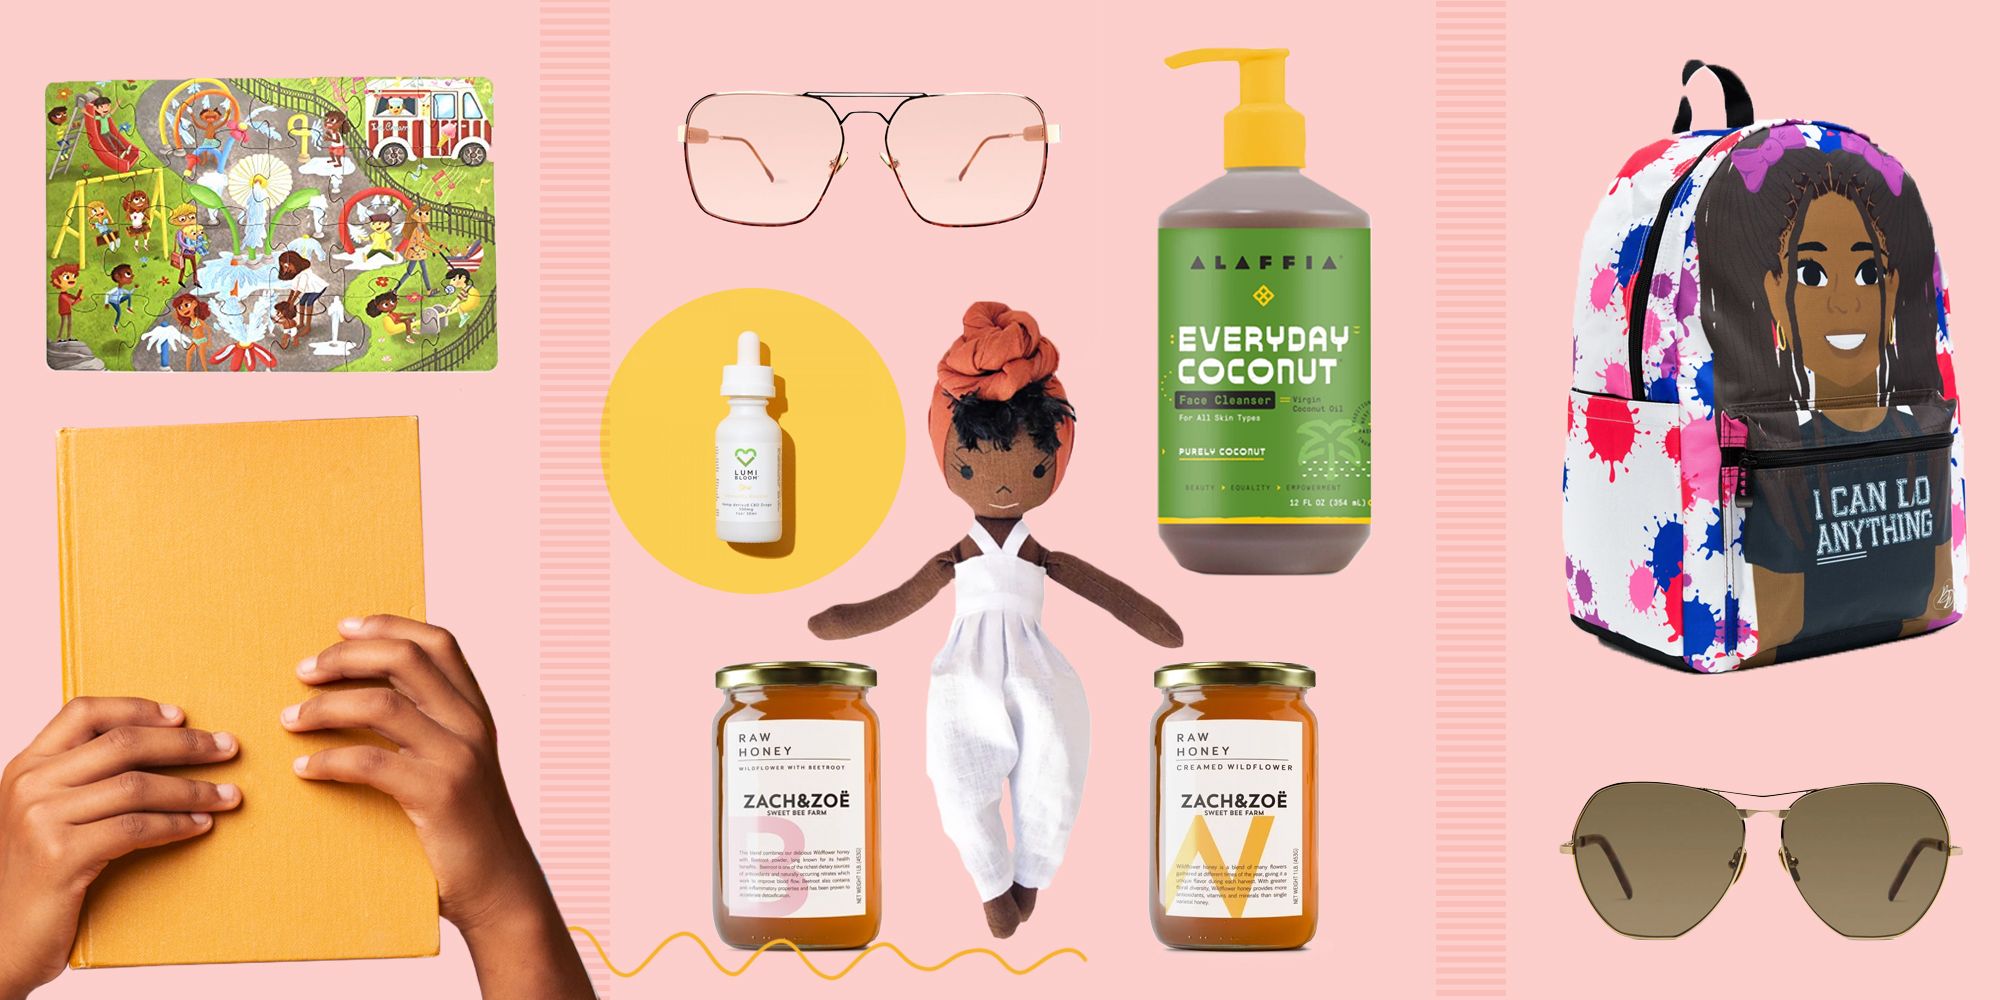 9 Black Stylists Share Their Favorite Small Black-Owned Brands